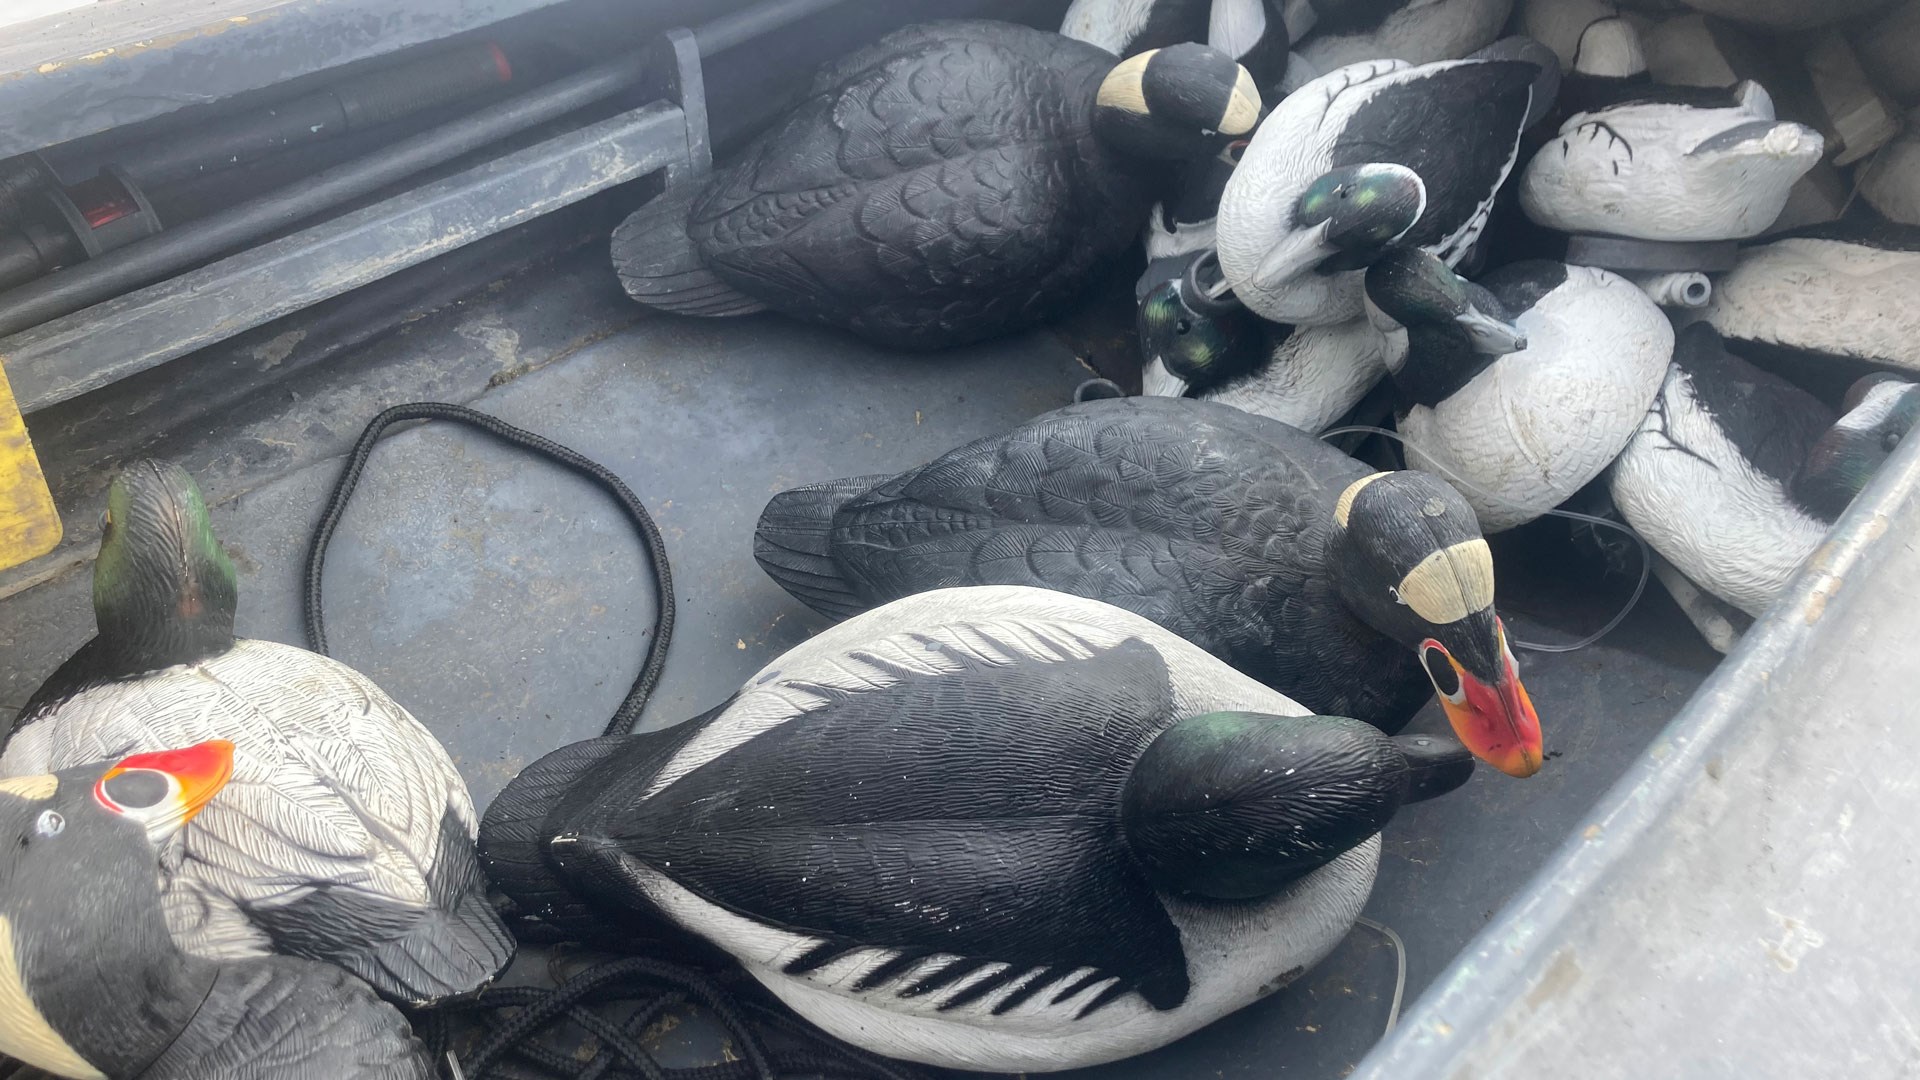 More decoys in boat